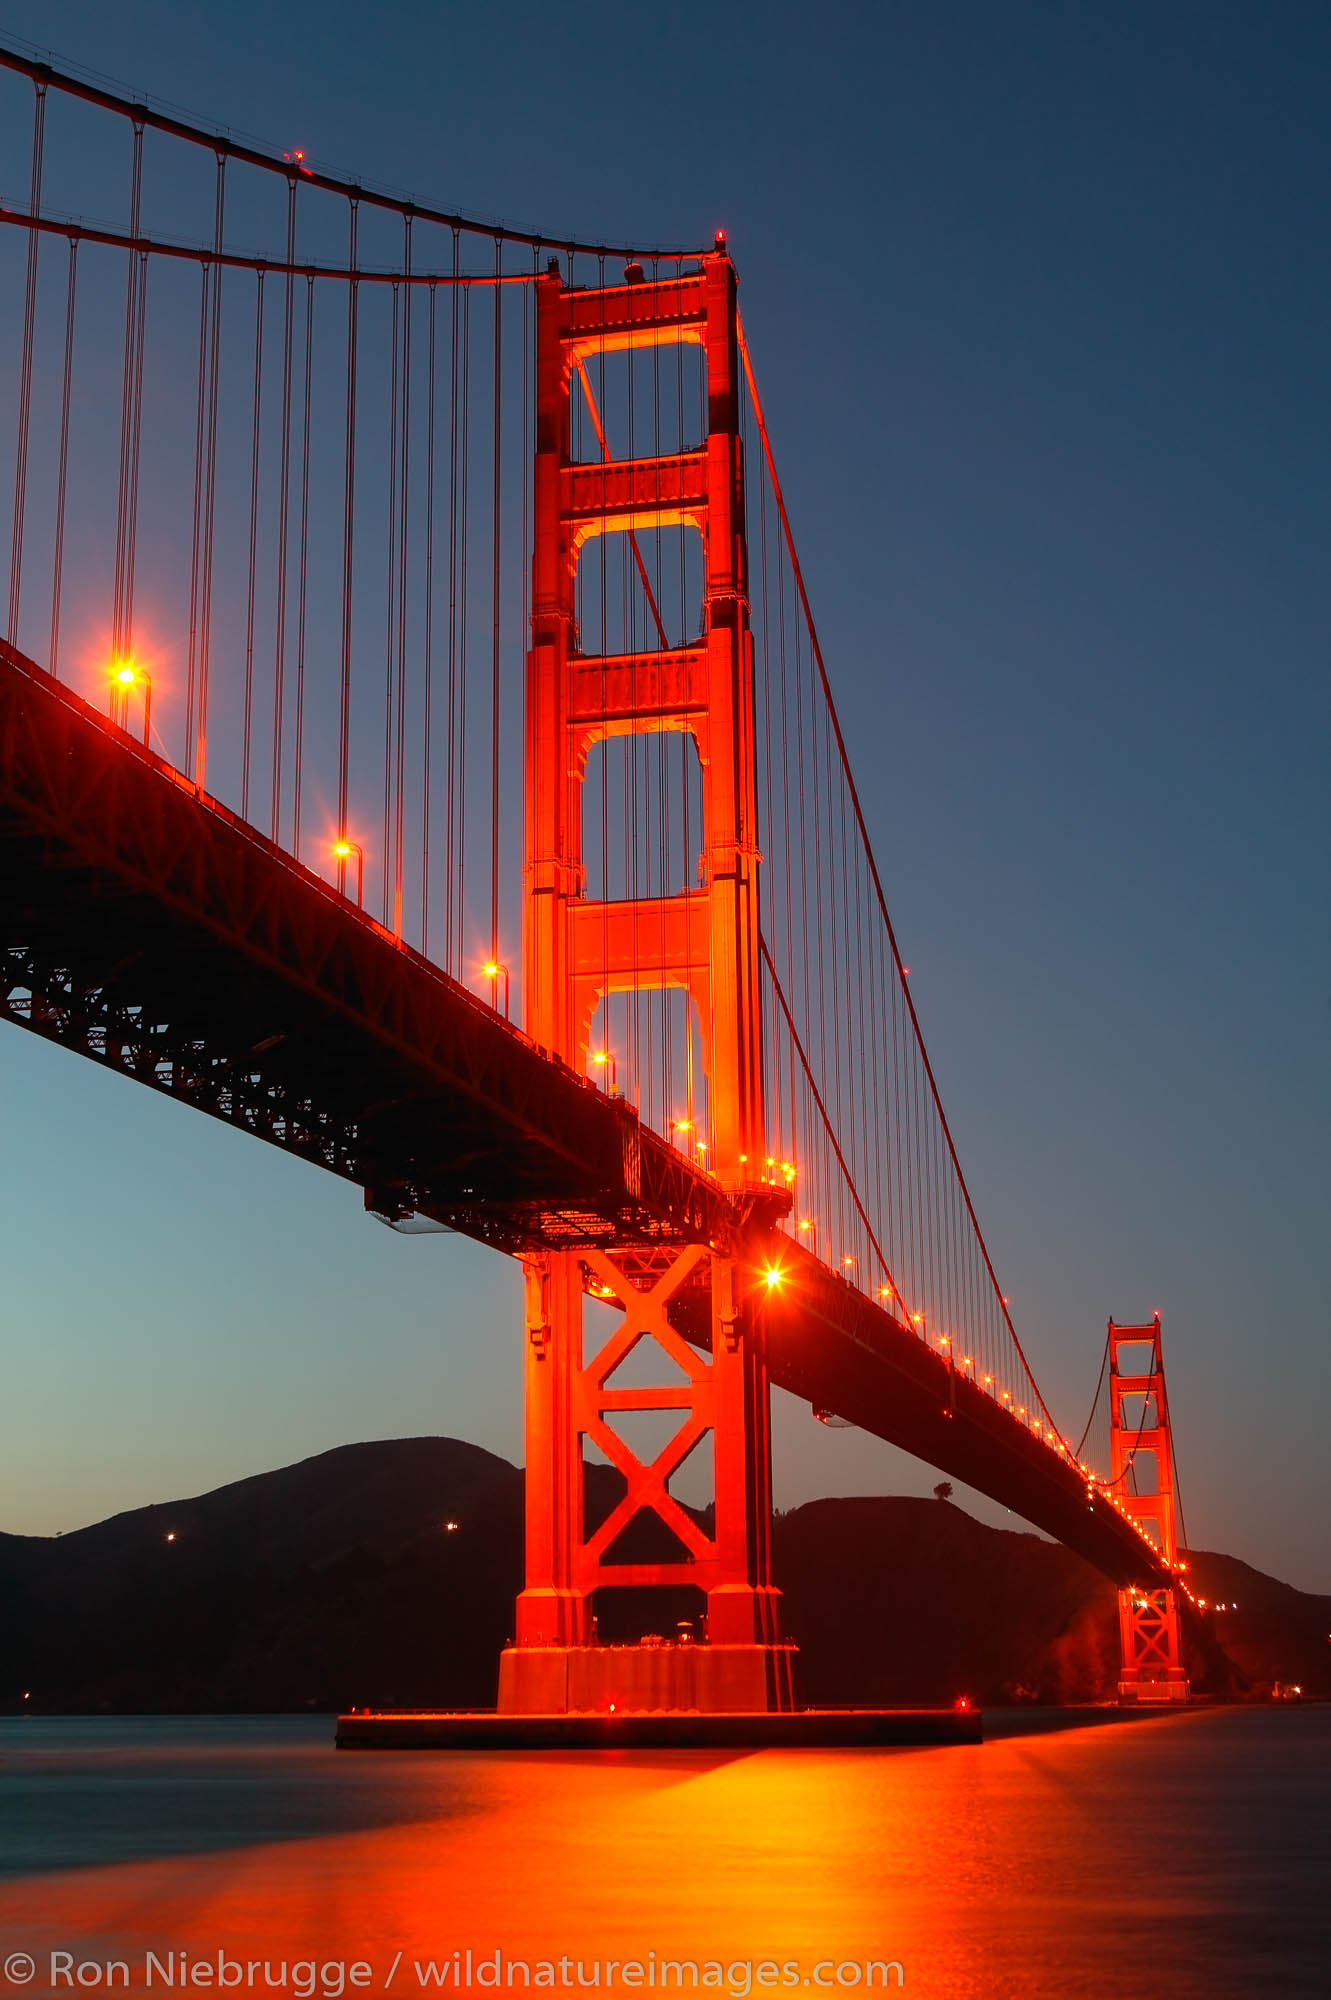 The Golden Gate Bridge from Fort Point in the evening, Presidio, San Francisco, California.